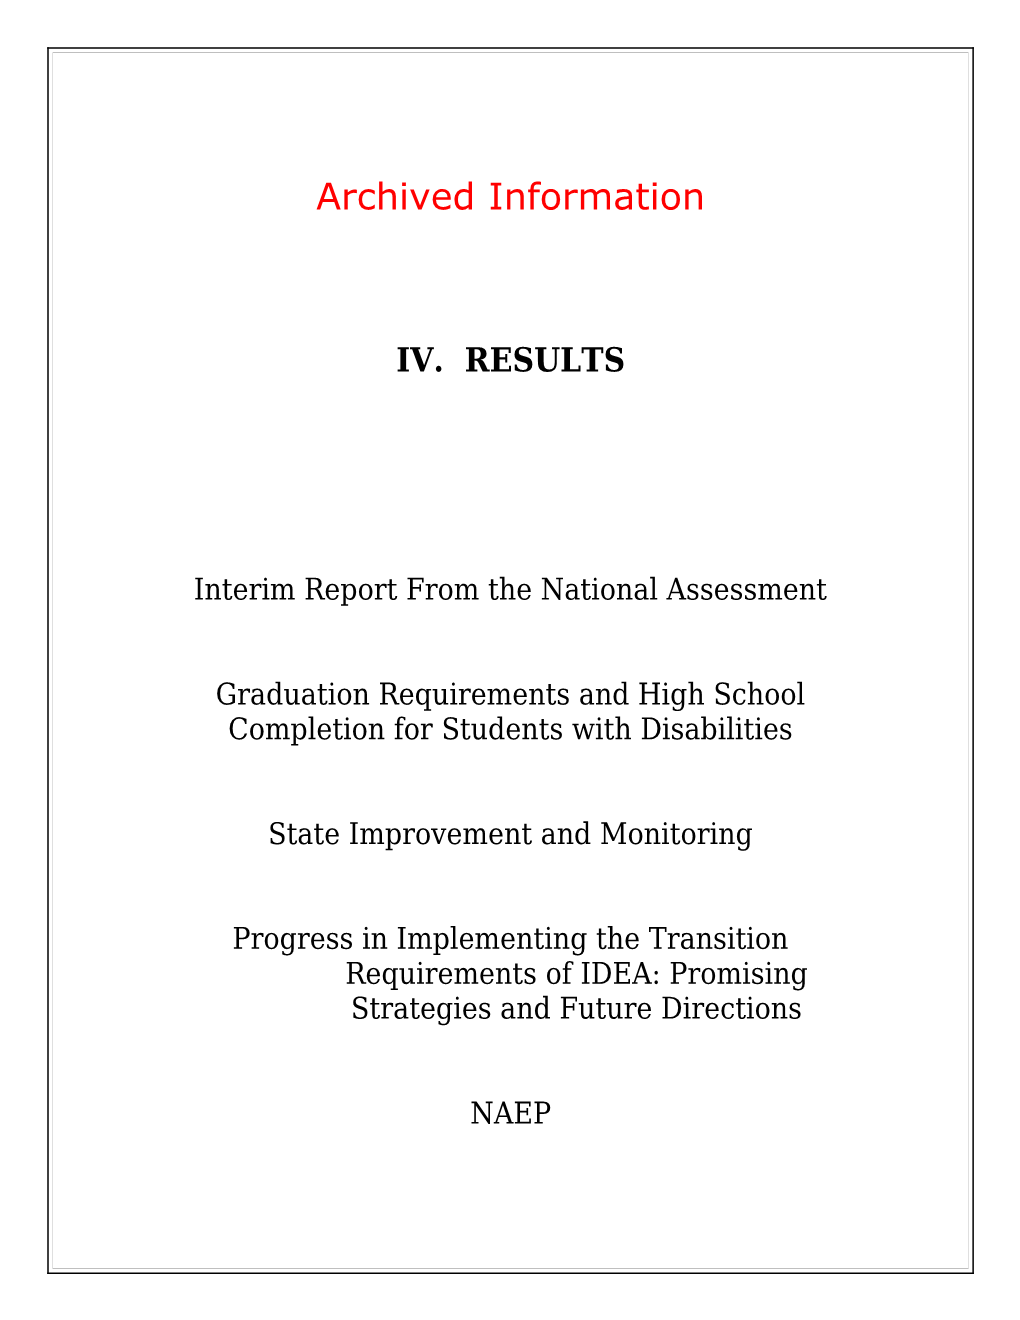 Archived: Chapter 4: Twenty First Annual Report to Congress on the Implementation of The